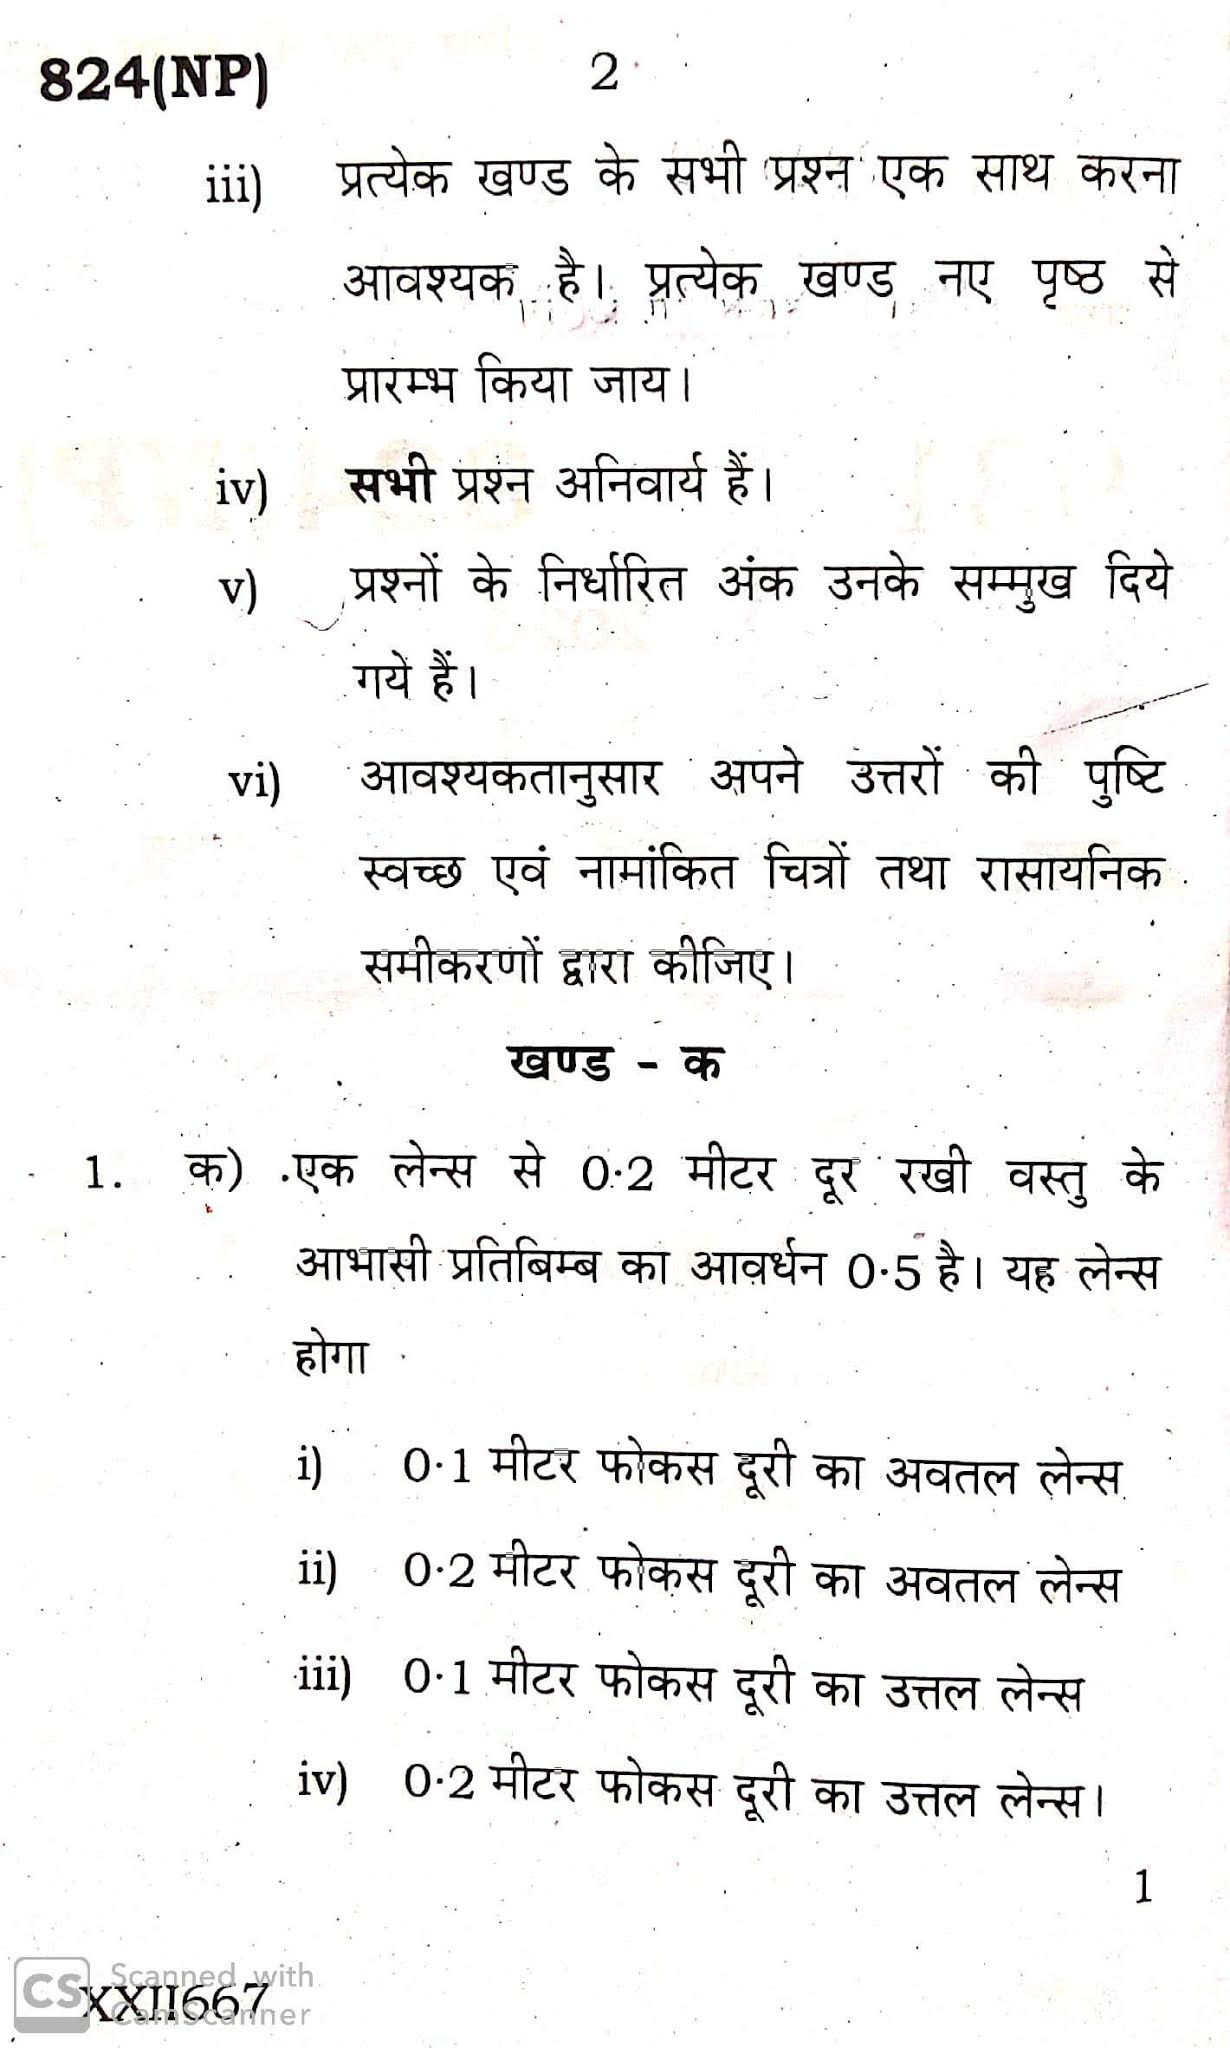 Science, UP Board Question paper for 10th (High school), 2020 Examination